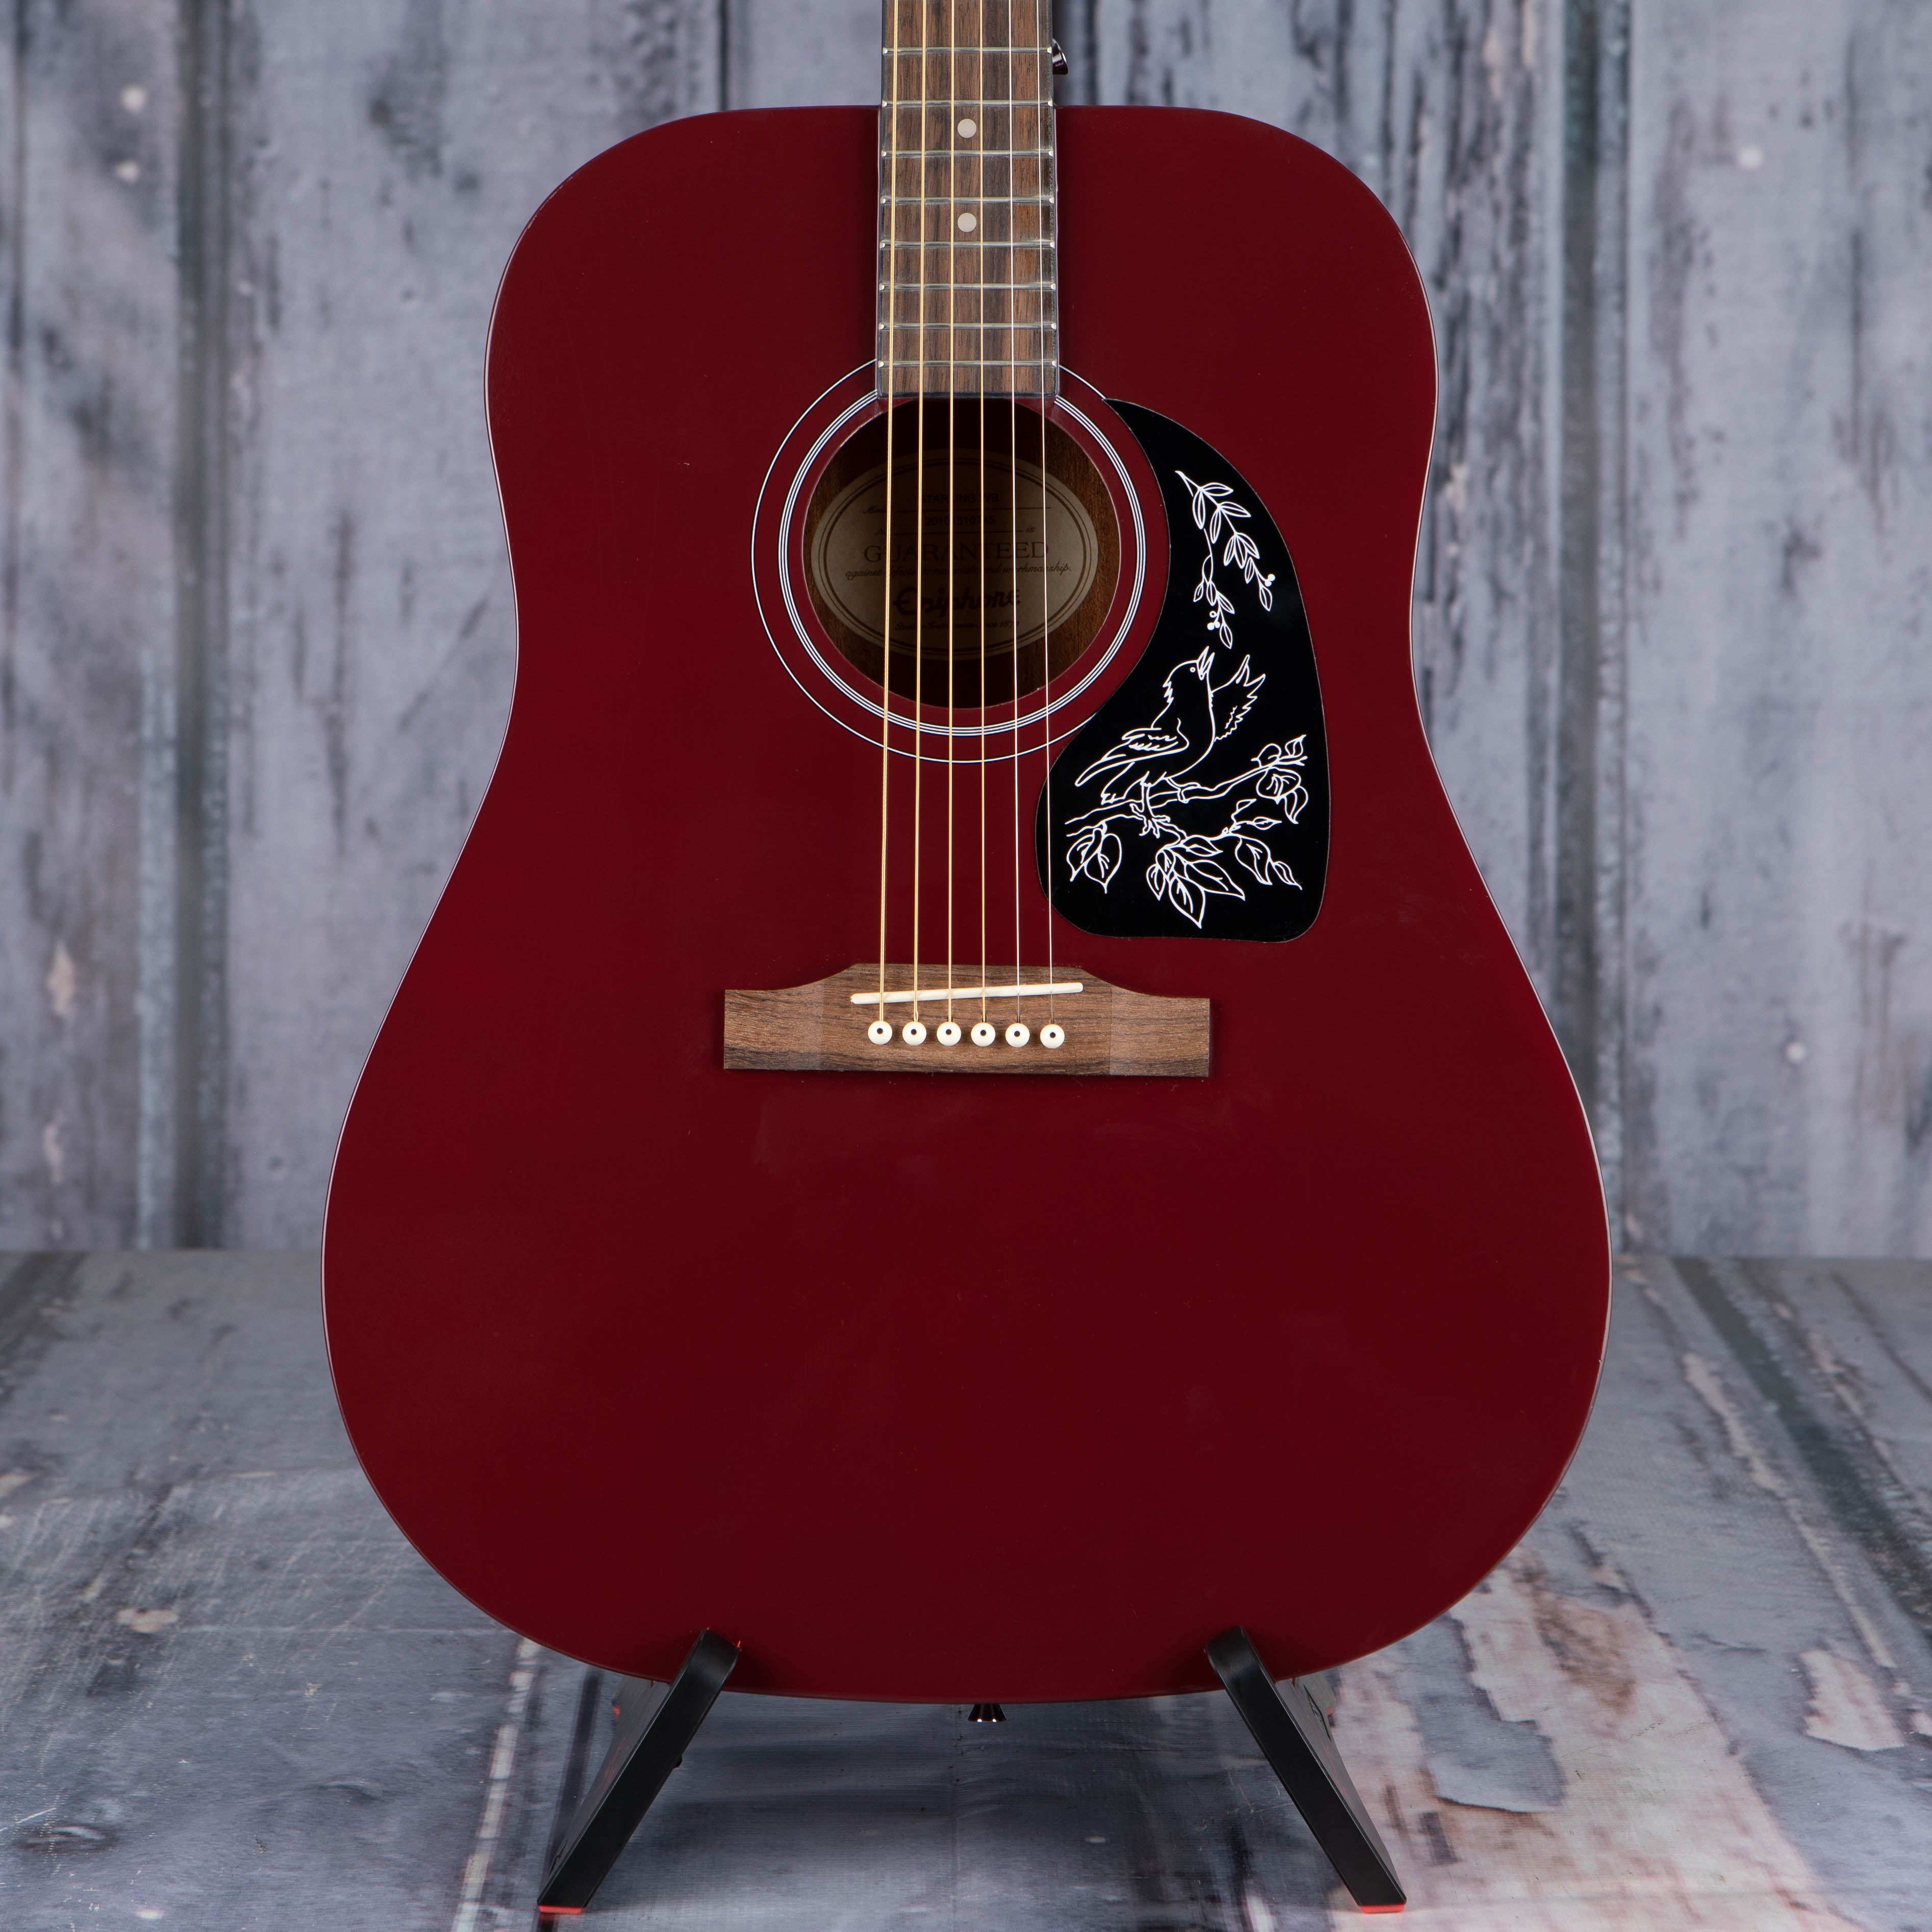 Epiphone Starling Acoustic Guitar, Wine Red, front closeup